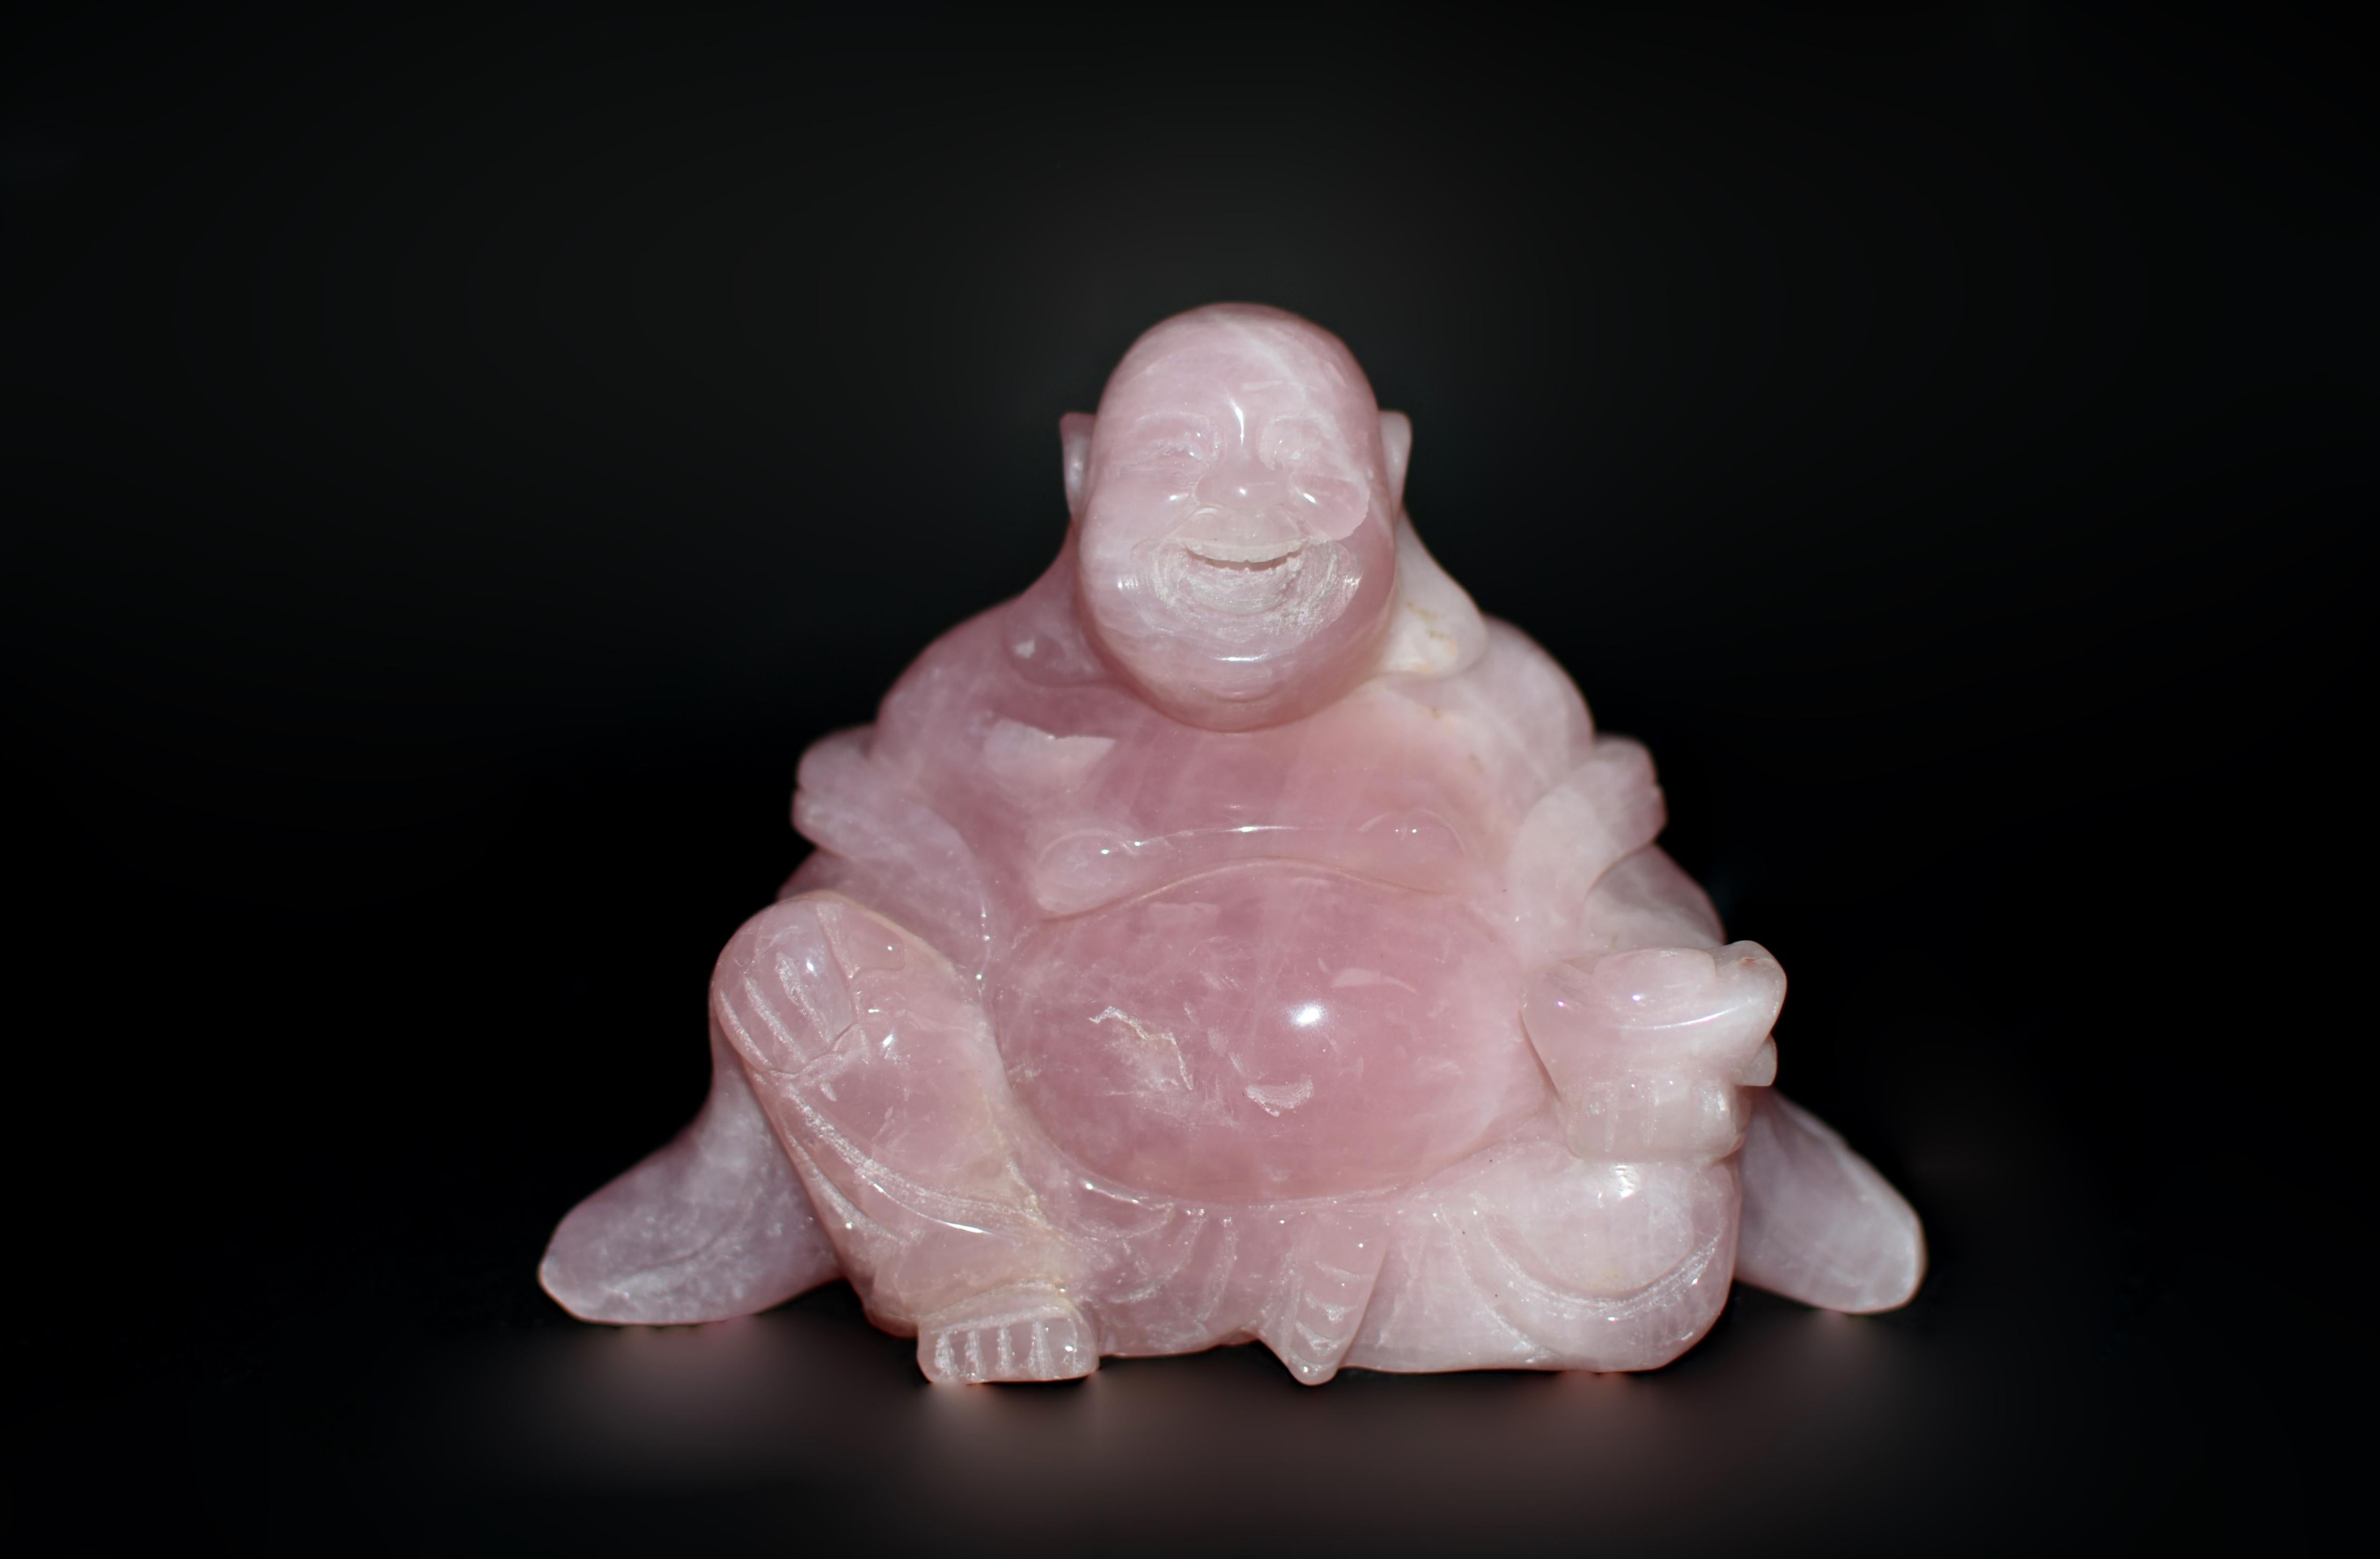 Carved from the purest grade of Madagascar rose quartz, this wonderful Happy Buddha statue radiates warmth and joy. With meticulous attention to detail, the master artisan has captured the Happy Buddha in a state of boundless mirth. Long earlobes